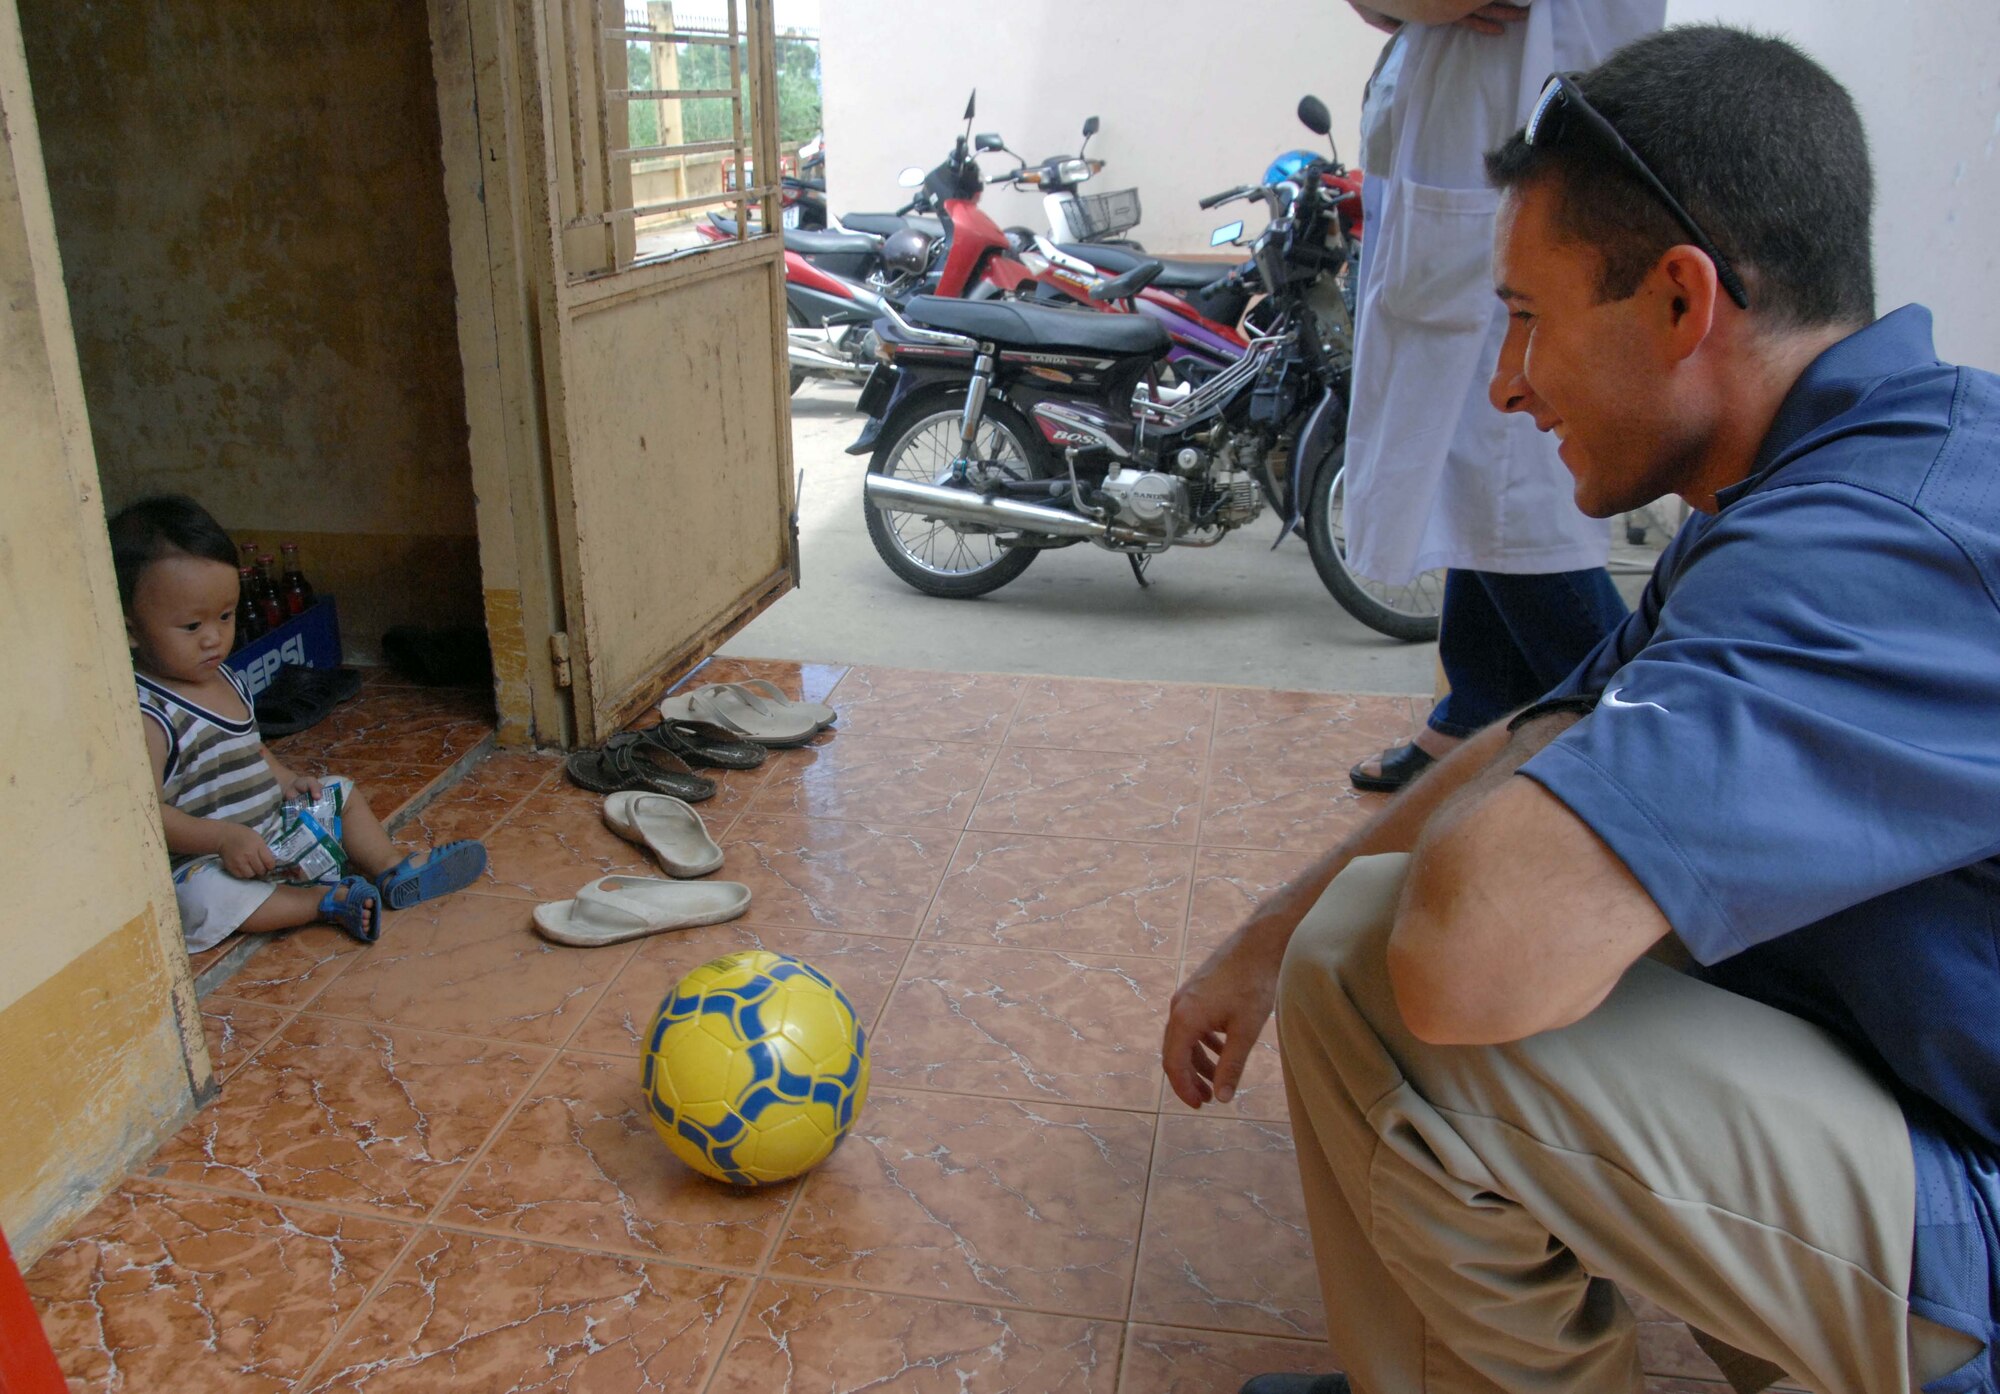 Special Agent Christopher Reilly, from Detachment 602 at Andersen Air Force Base, Guam, gives a soccer ball to a young Vietnamese child at the medical clinic set up at Truong Thanh, Vietnam as part of Pacific Angel 10-2. Operation Pacific Angel is a joint and combined humanitarian and civic assistance operation conducted in the Pacific area of responsibility to support U.S. Pacific Command's capacity-building efforts. More than 50 U.S. military members are working alongside the Vietnamese military, non-governmental organizations and civil health personnel in medical and engineering efforts during the mission scheduled through May 15. (U.S. Air Force photo/Capt. Timothy Lundberg)